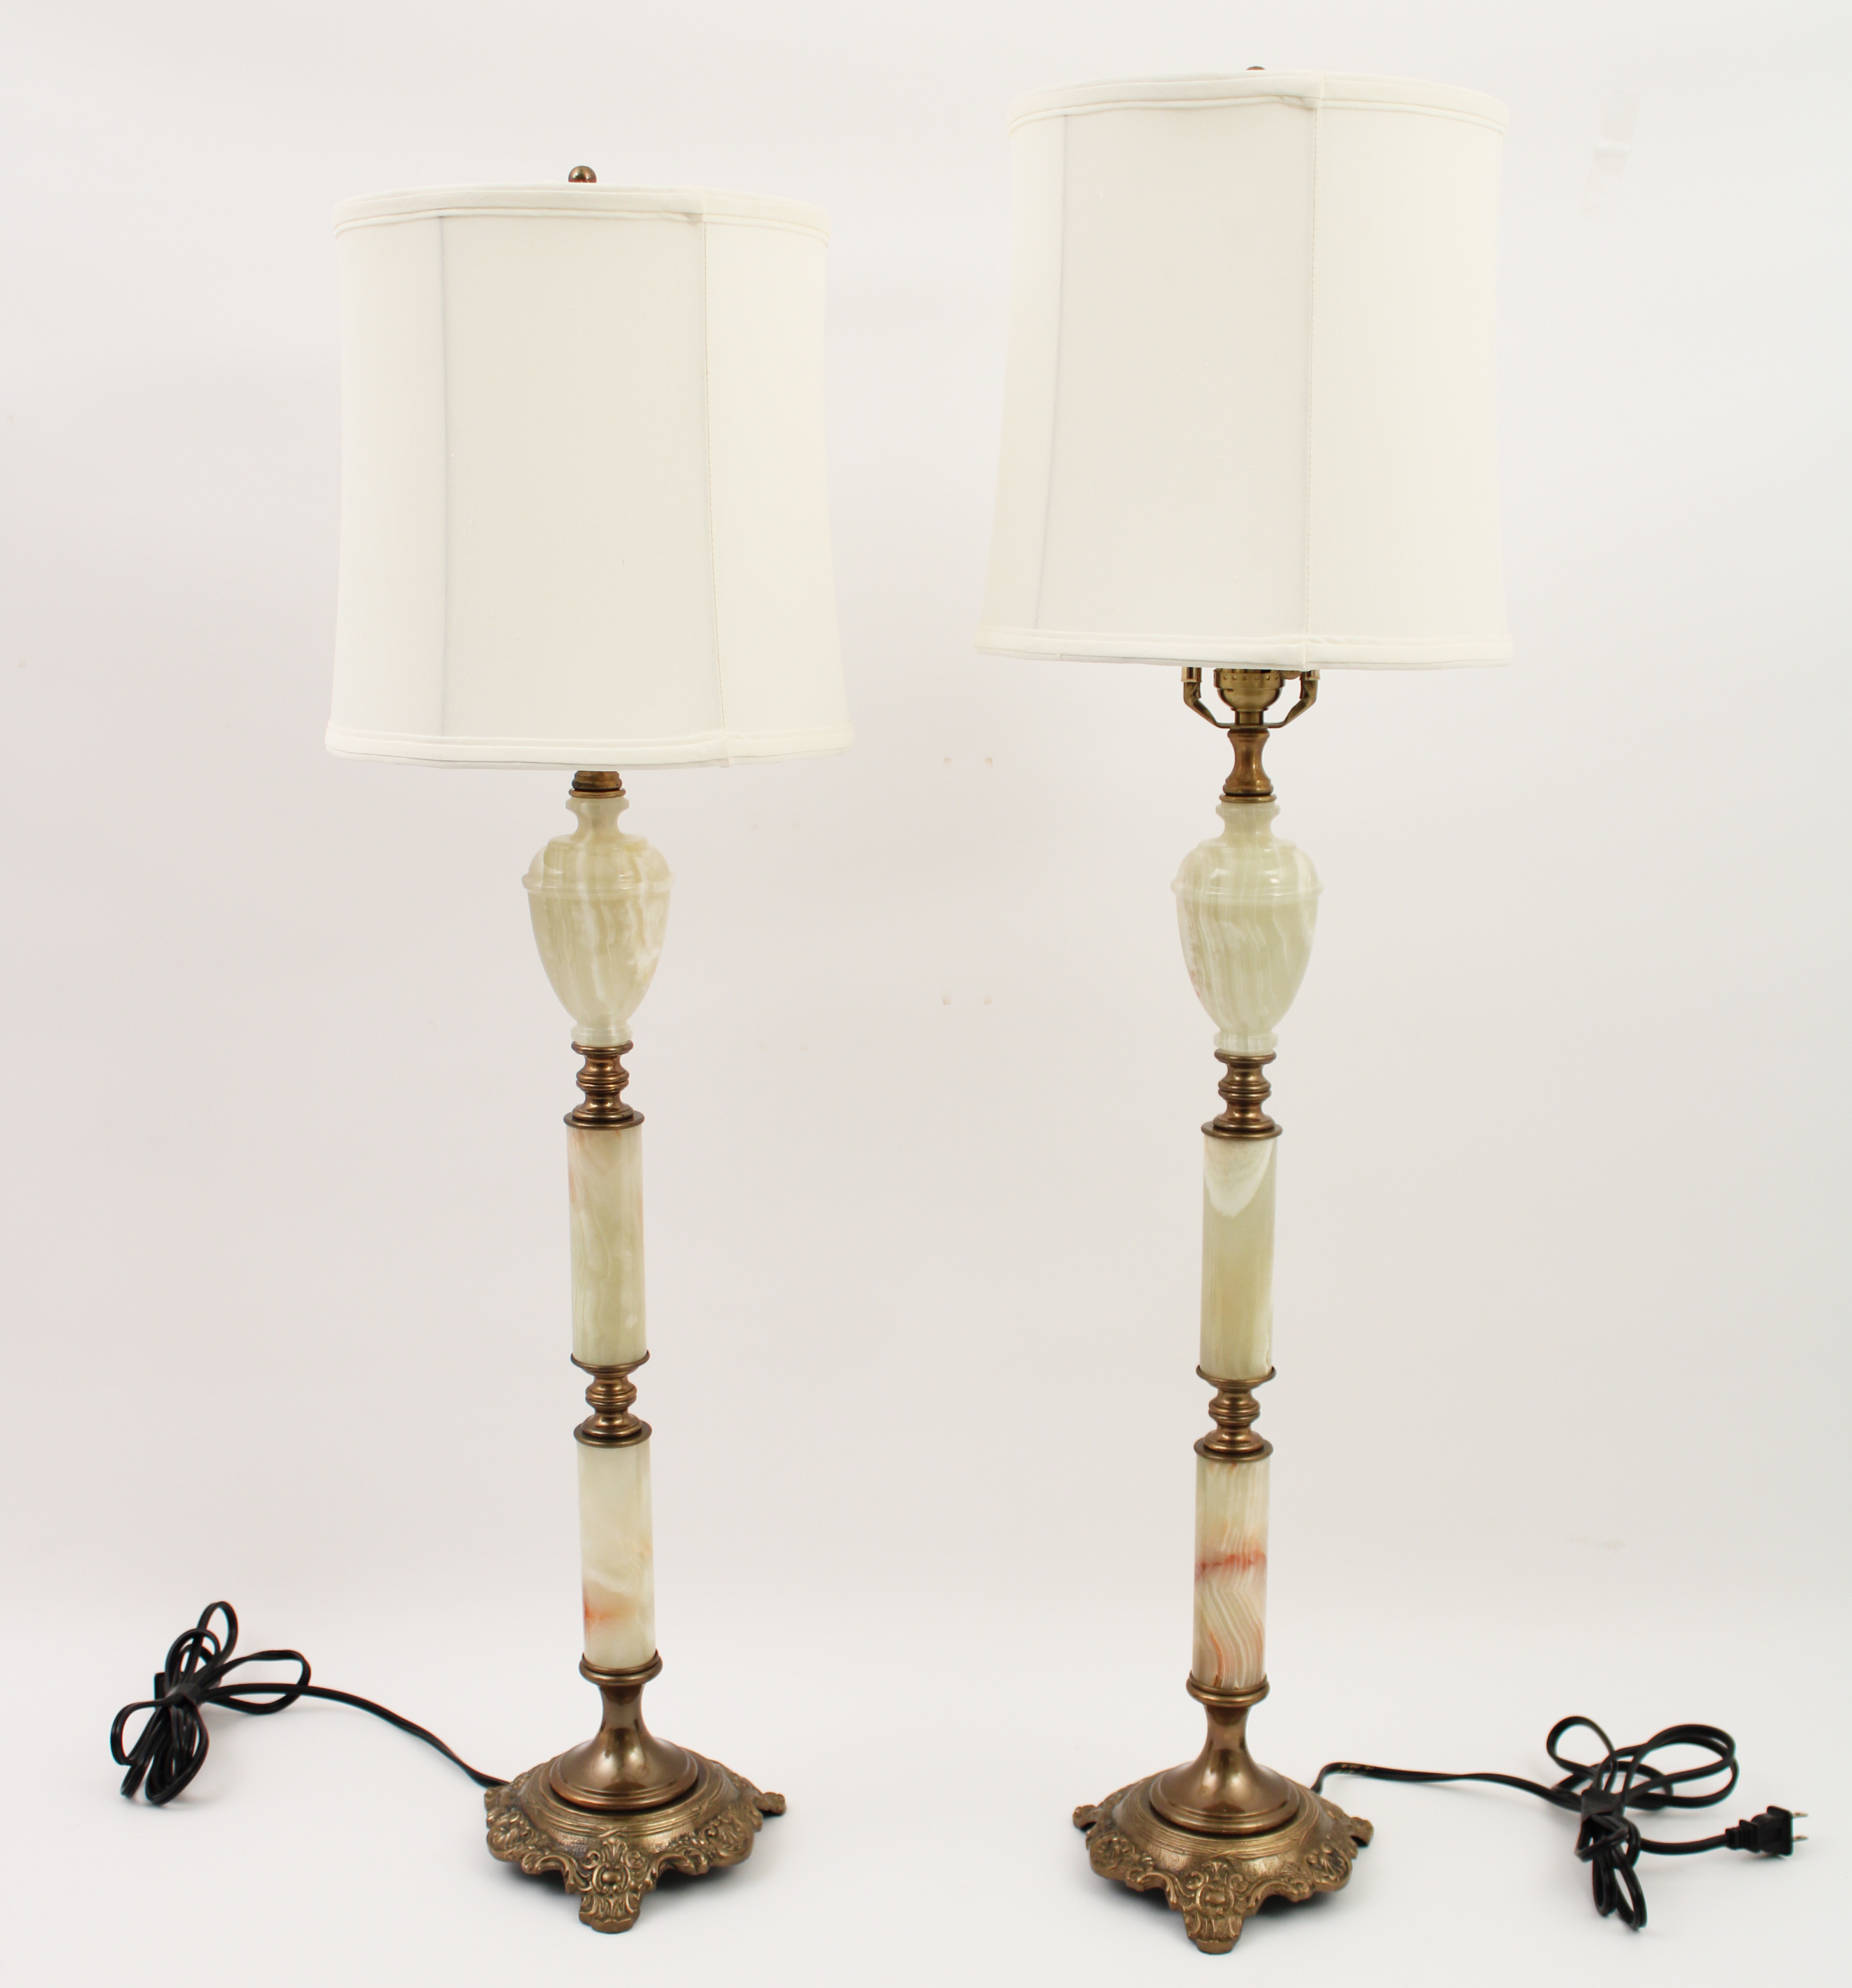 NEAR PAIR OF ONYX AND BRASS LAMPS 2c8c70